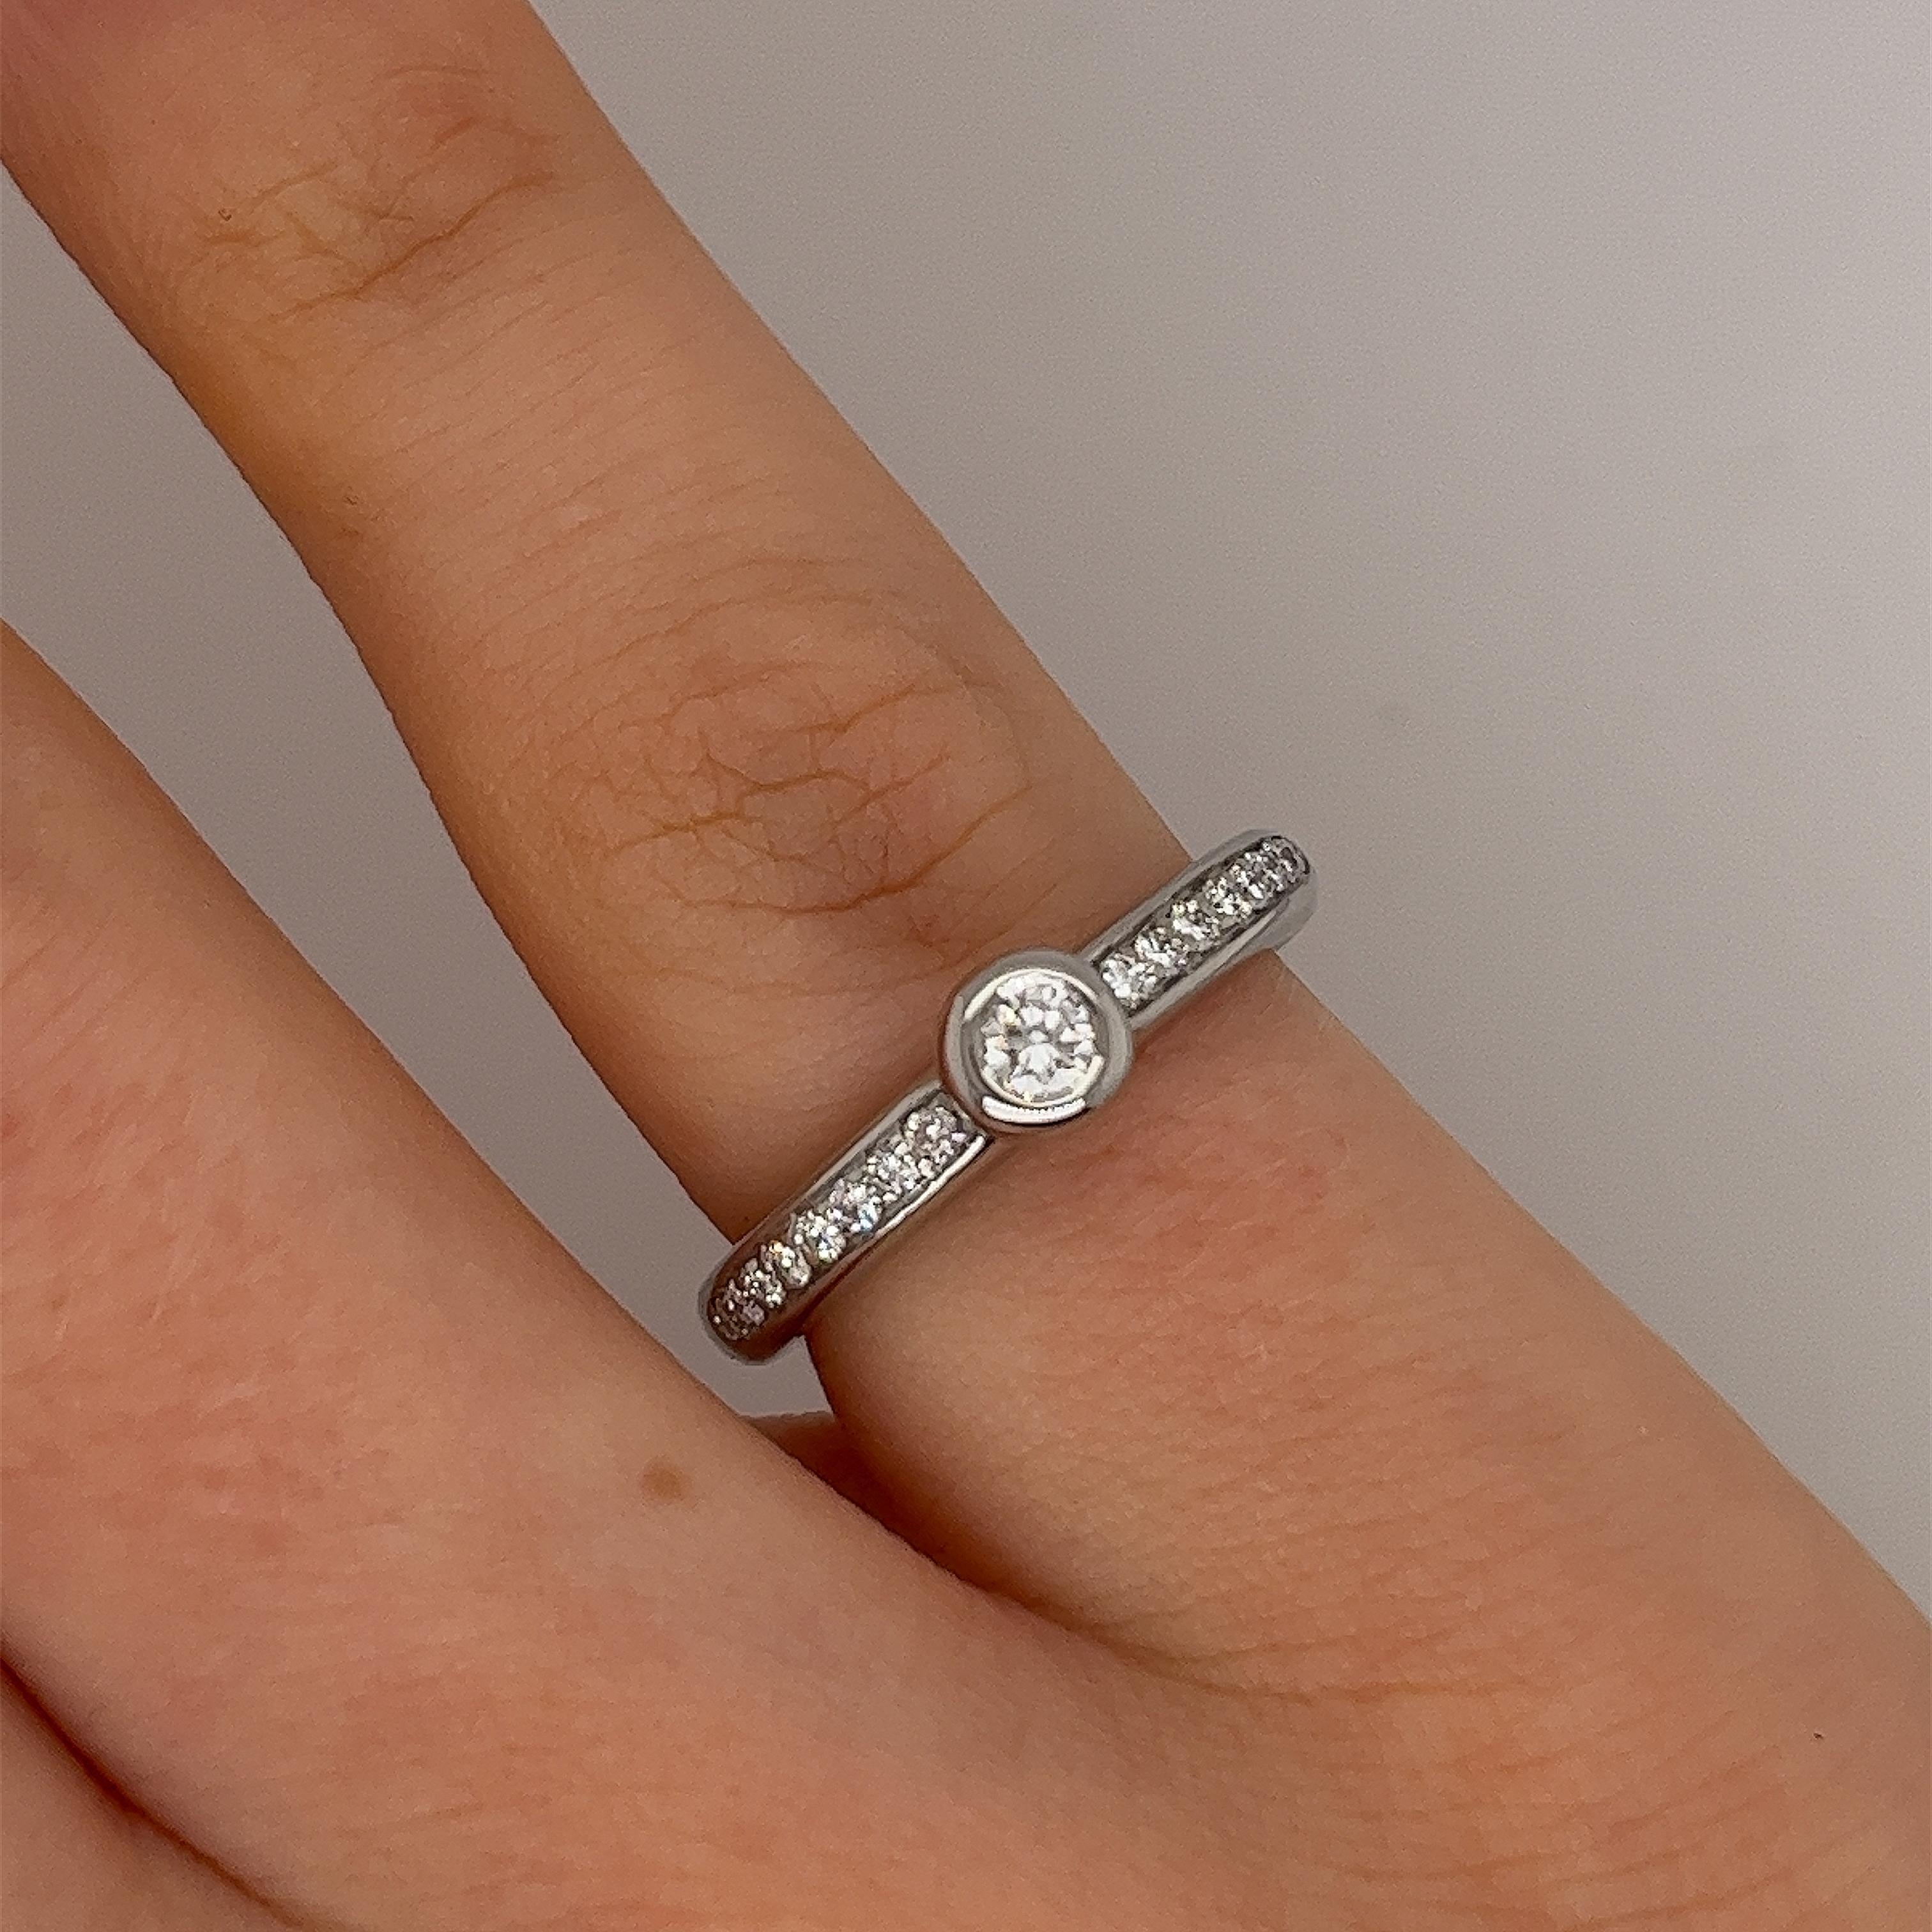 An elegant diamond ring for your engagement, 
set with 0.10ct centre stone and 16 small diamonds on shoulders, 0.16ct natural round brilliant cut diamond in an 18ct white gold H. Stern setting.
(hallmark worn, 6 stars inside and H.S)

Total Diamond